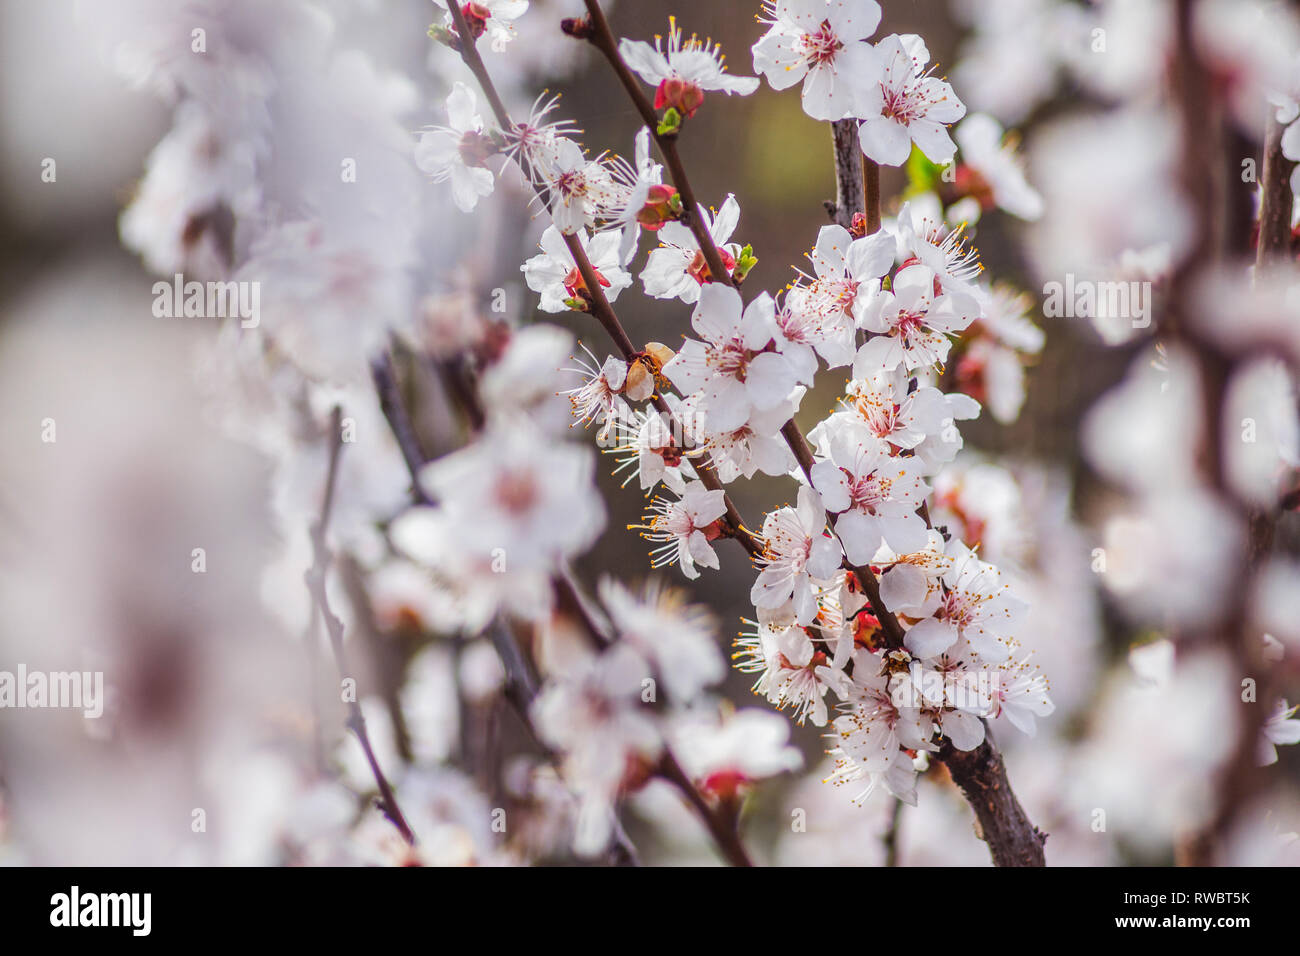 White apricot petals on green background. Apricot blossom close-up macro view. Spring nature photography Stock Photo